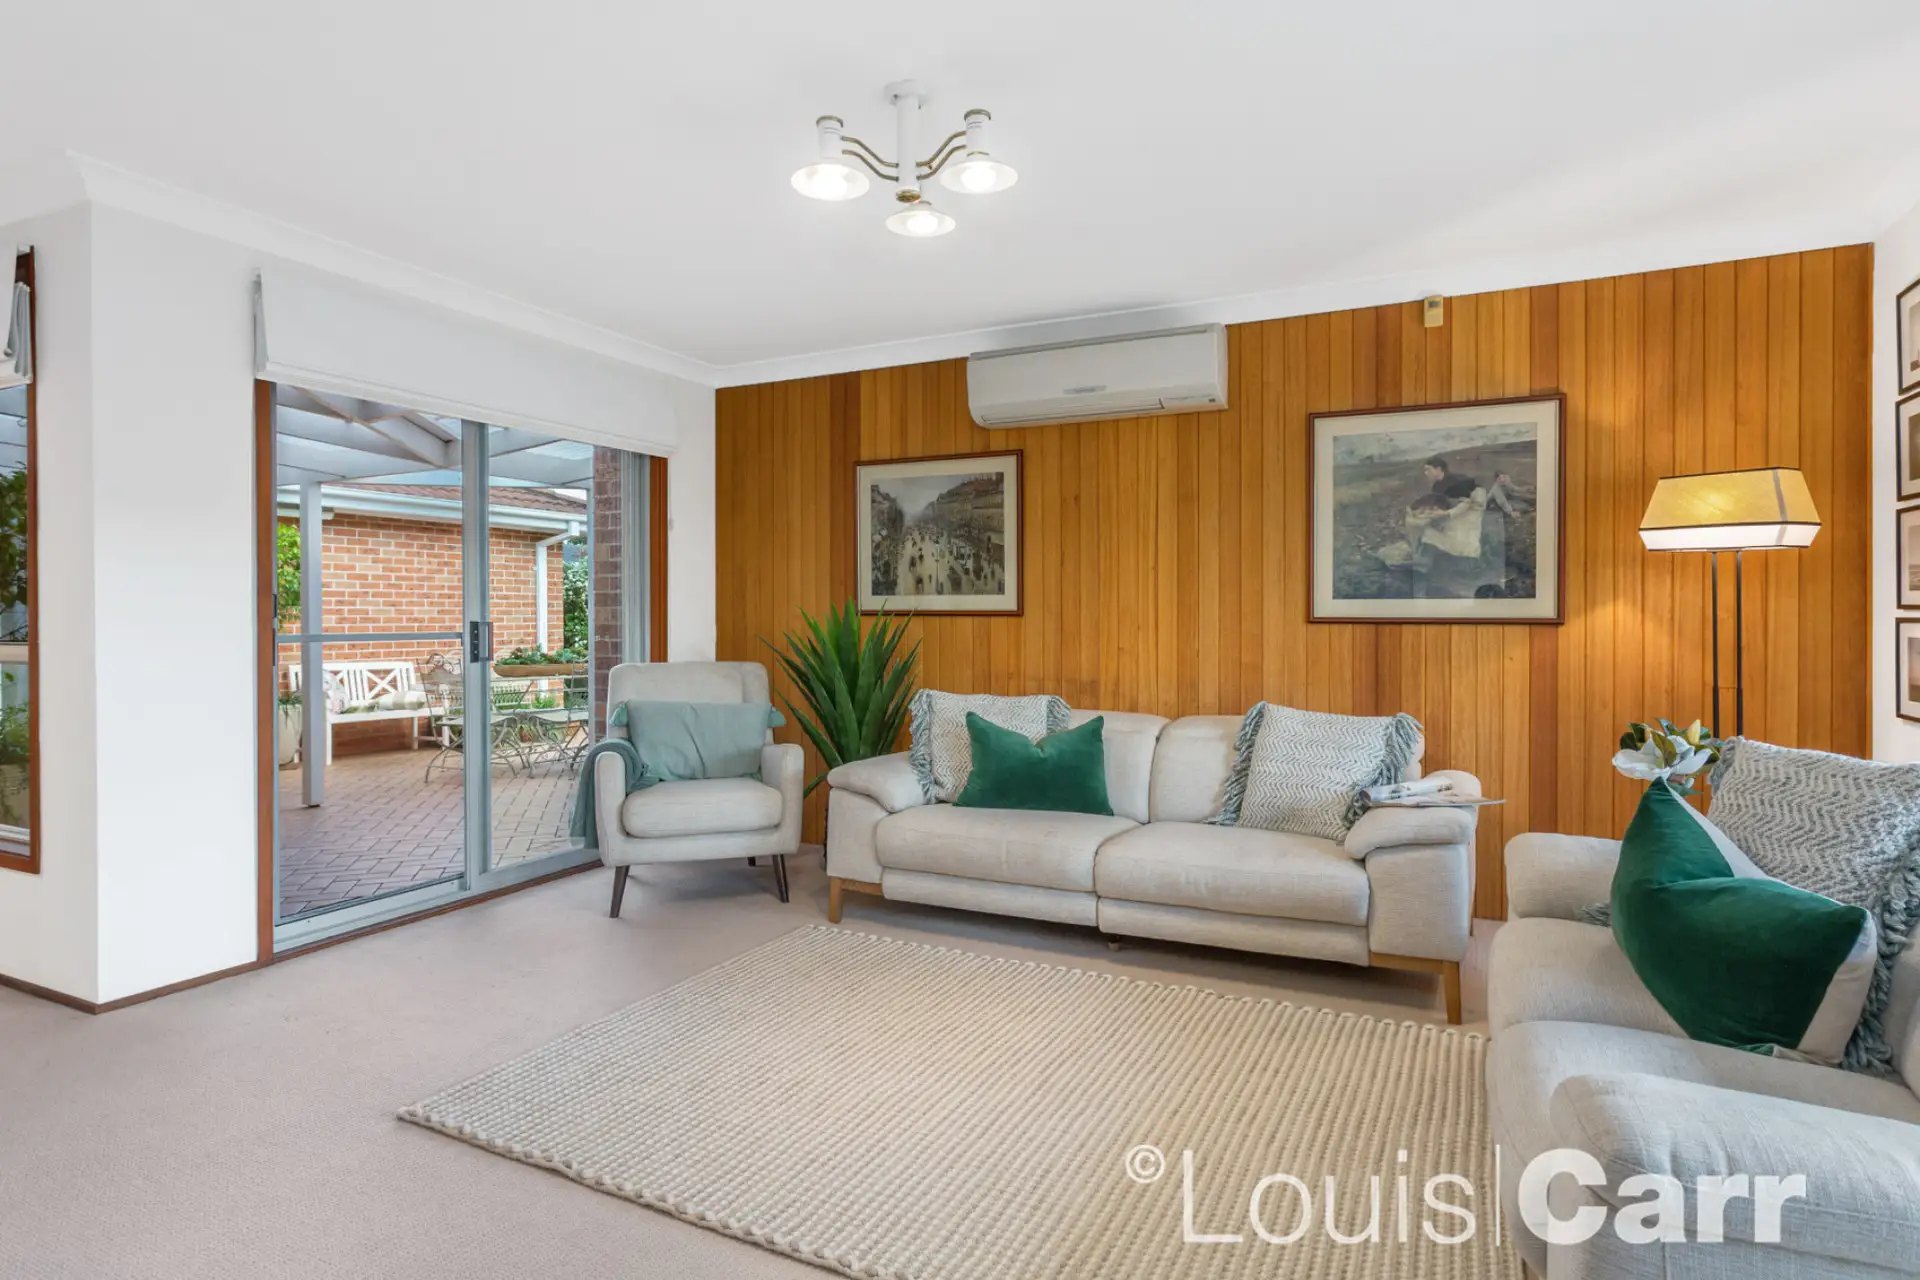 Photo #3: 3 Farrier Place, Castle Hill - Sold by Louis Carr Real Estate